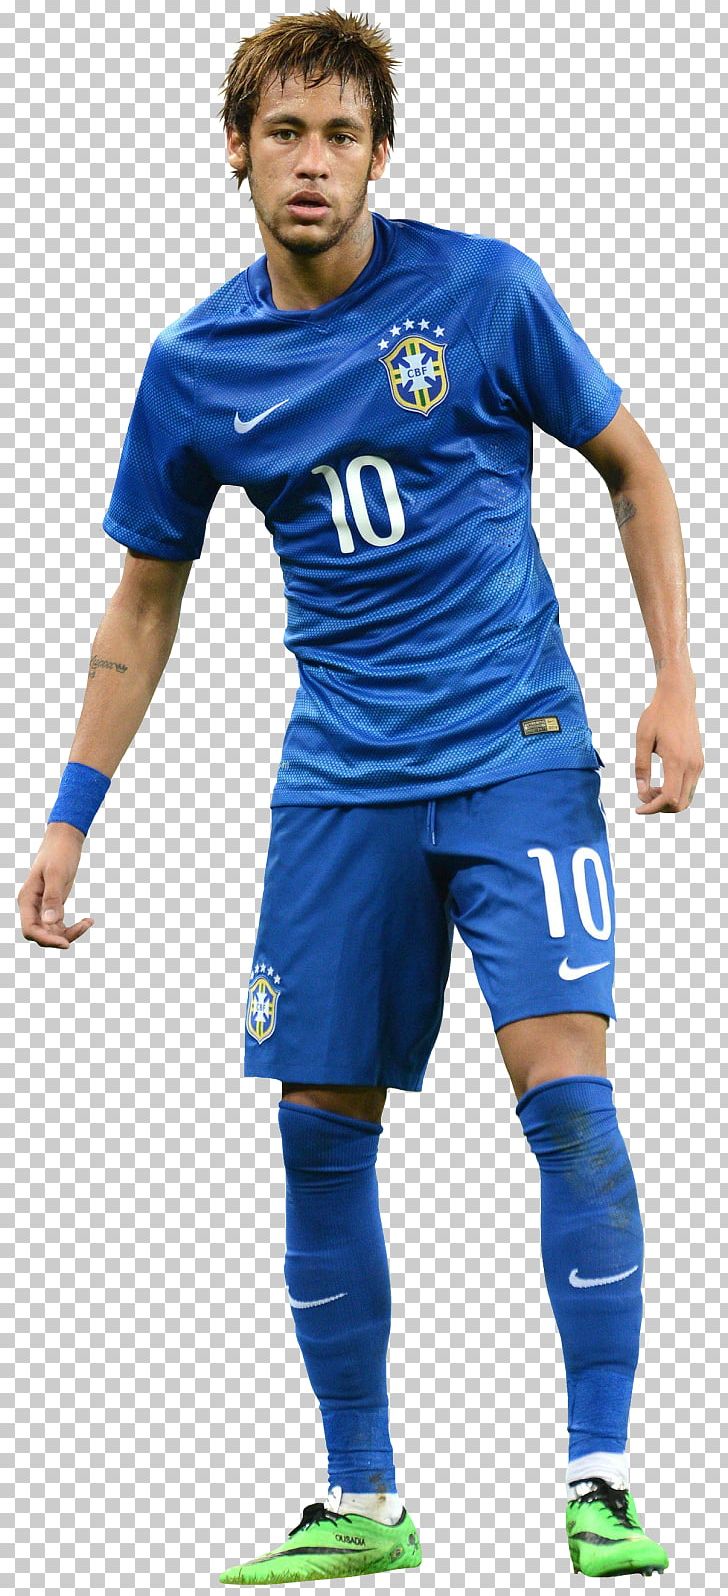 Neymar T-shirt Football Player Dream League Soccer Clothing PNG, Clipart, Ball, Blue, Celebrities, Clothing, Cristiano Ronaldo Free PNG Download